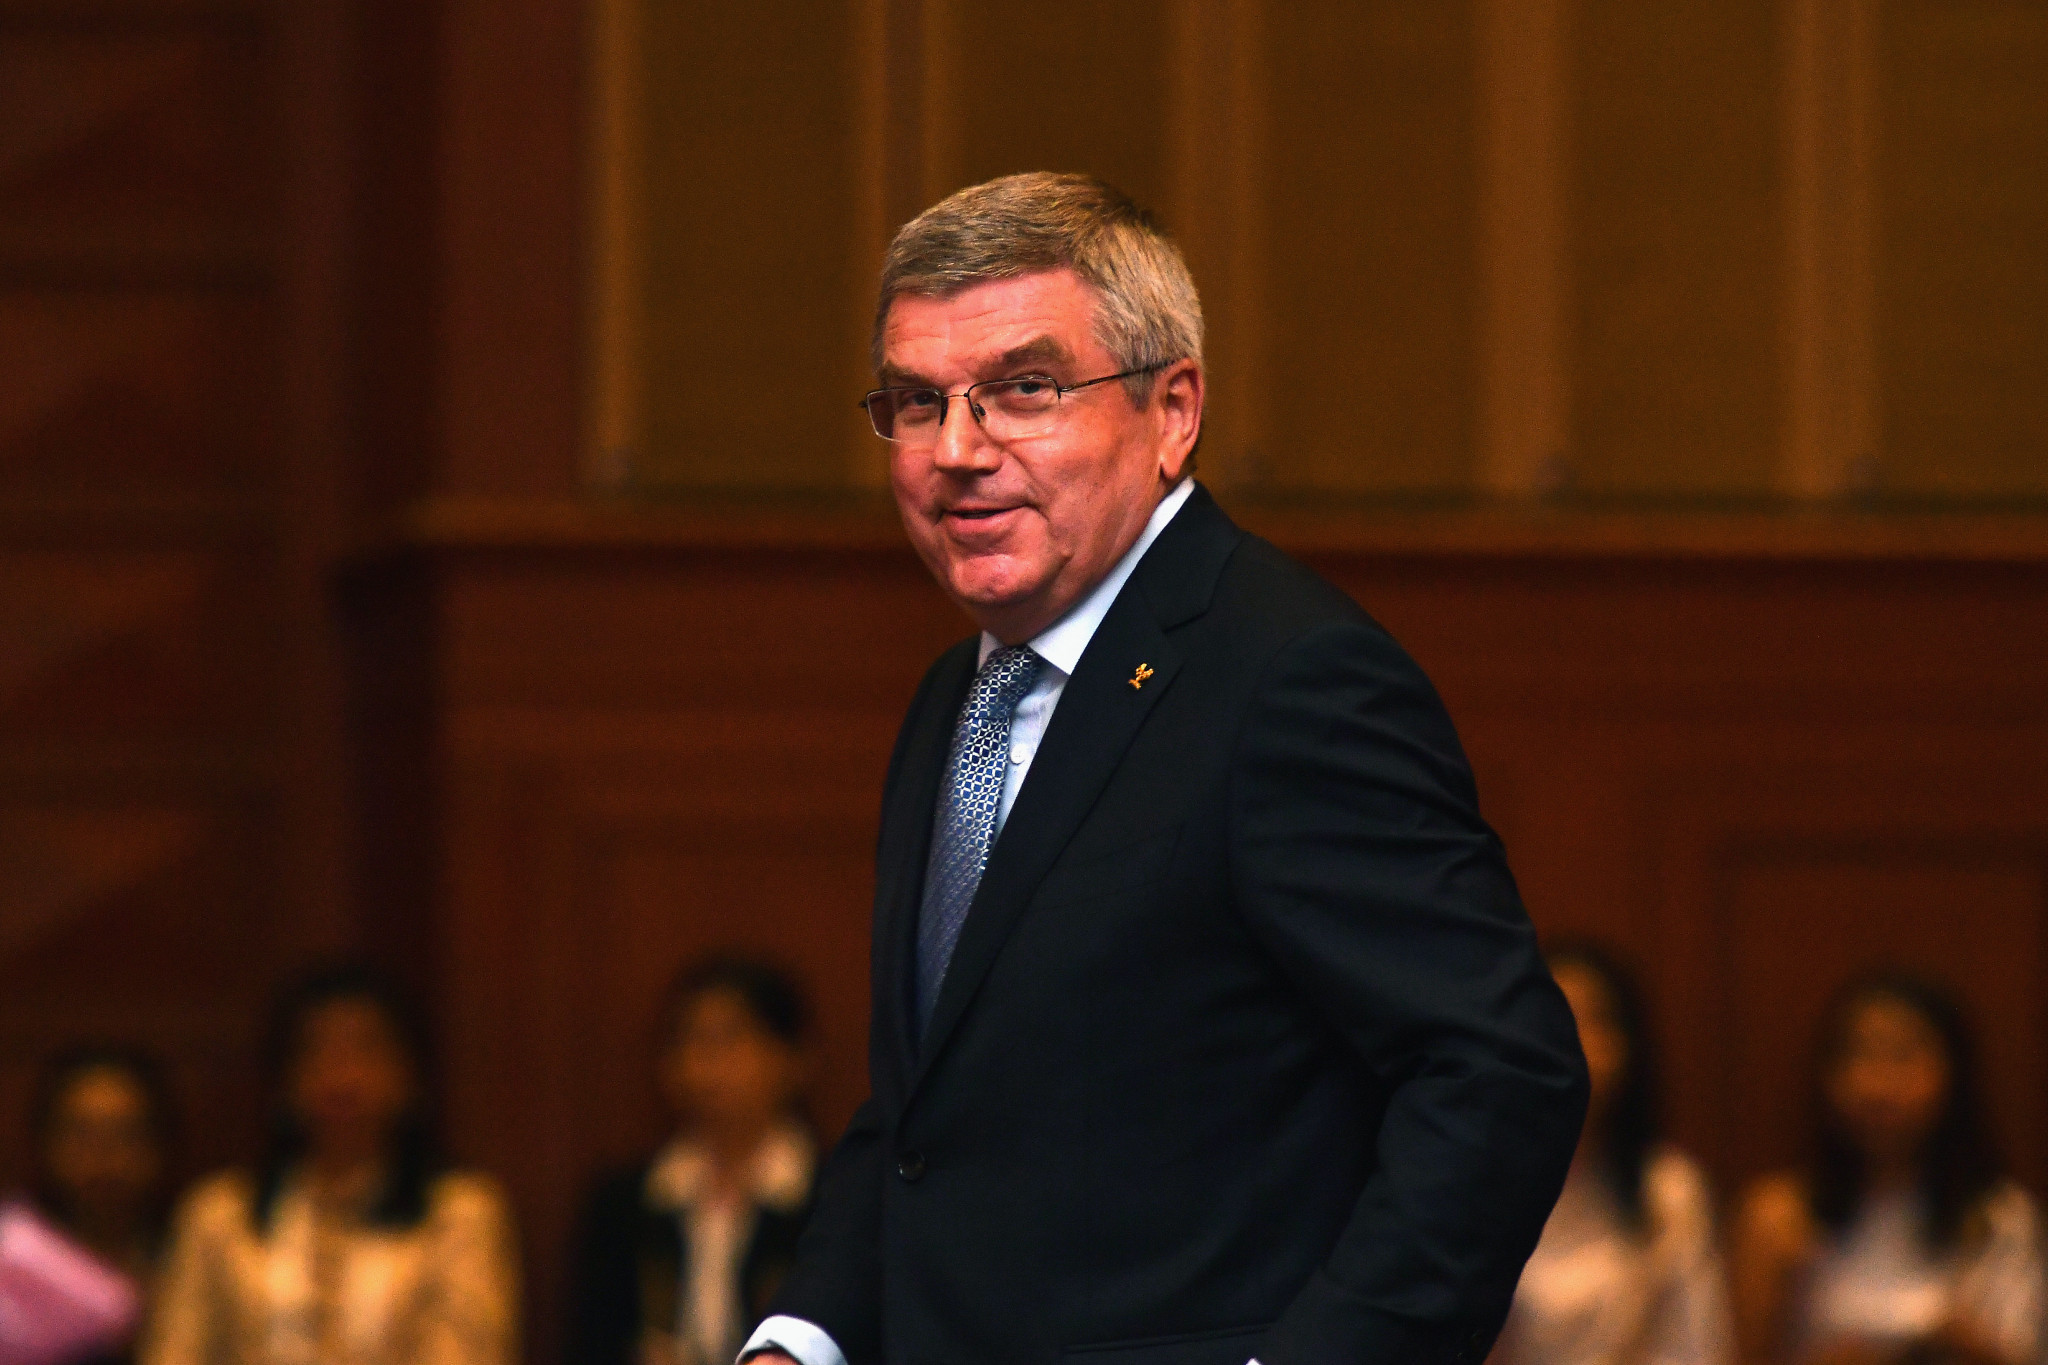 Thomas Bach spoke at a meeting attended by all 33 sports on the Tokyo 2020 Olympic programme ©Getty Images